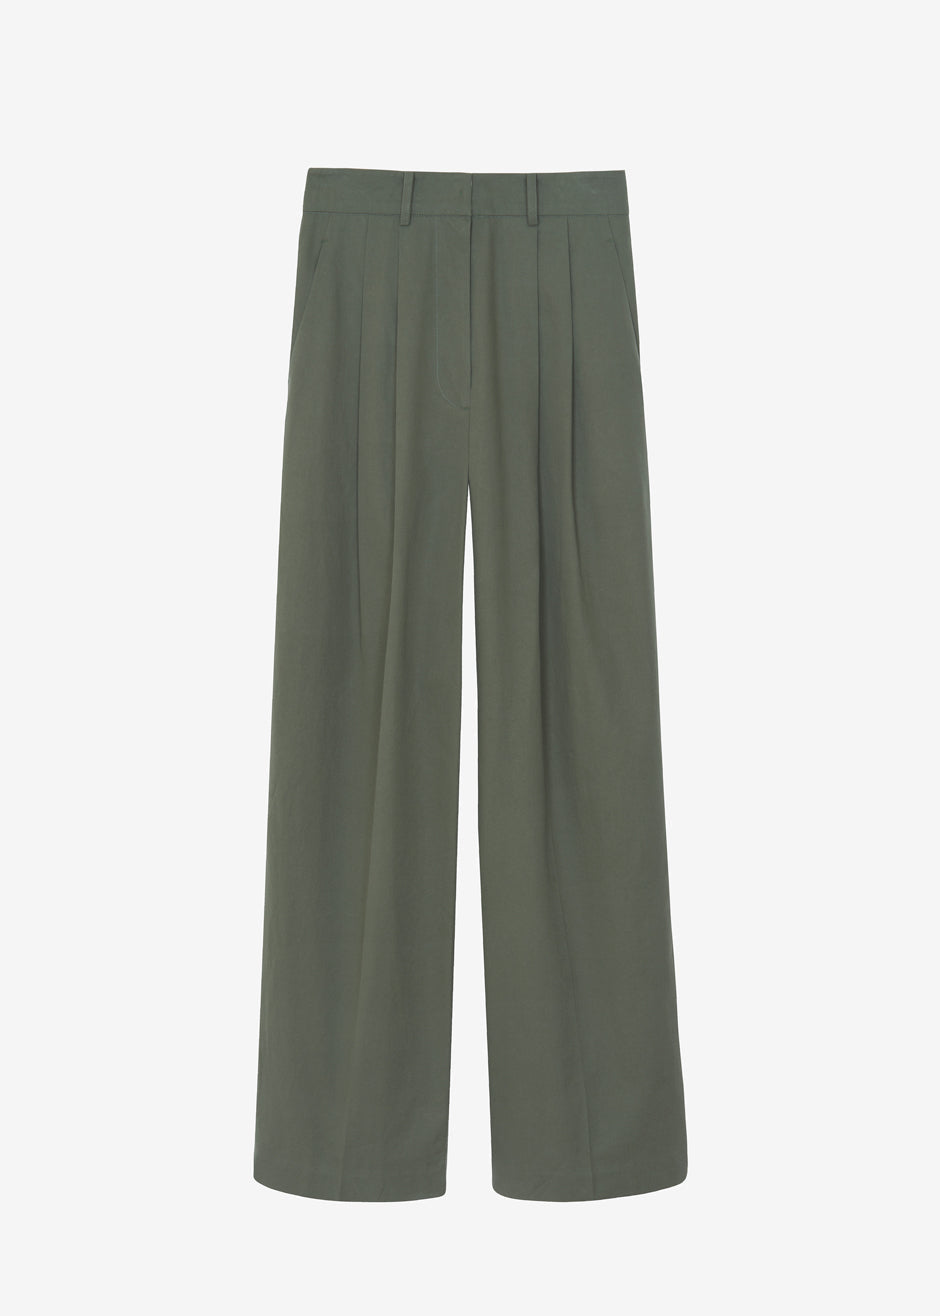 Tansy Cotton Pants - Olive - 6